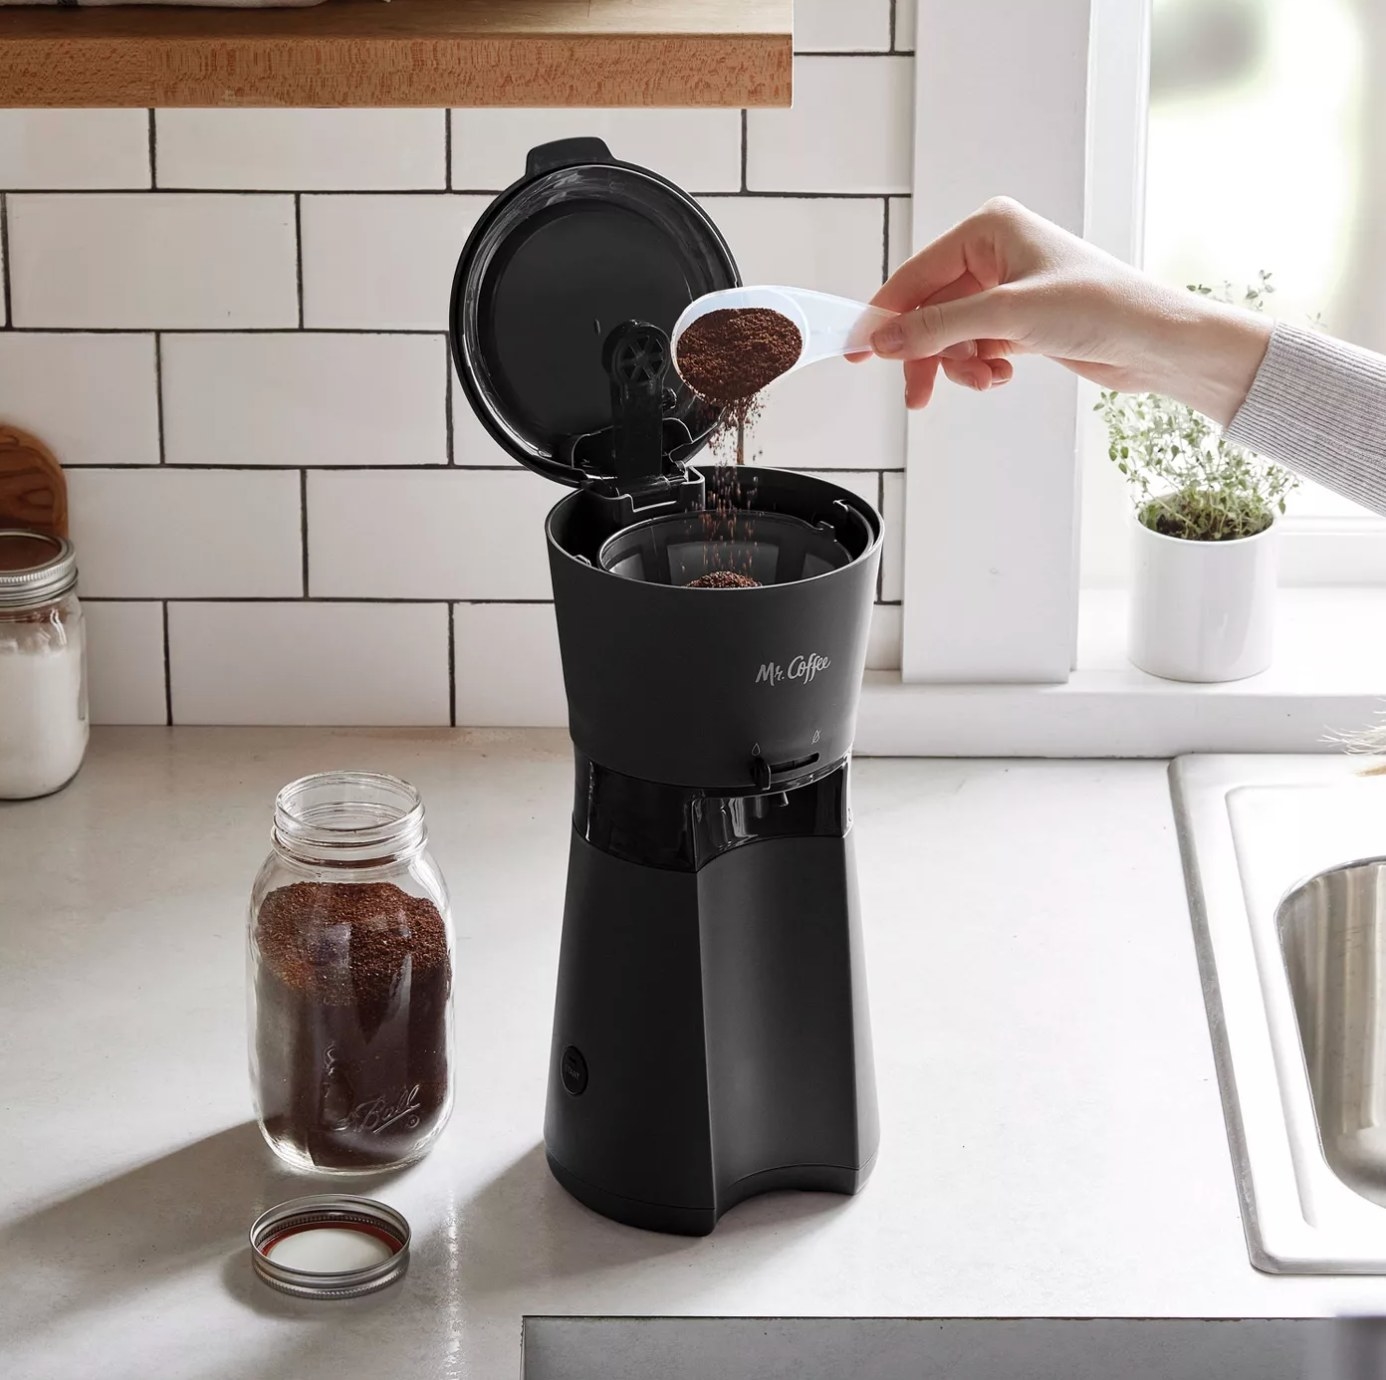 The iced coffee maker in black